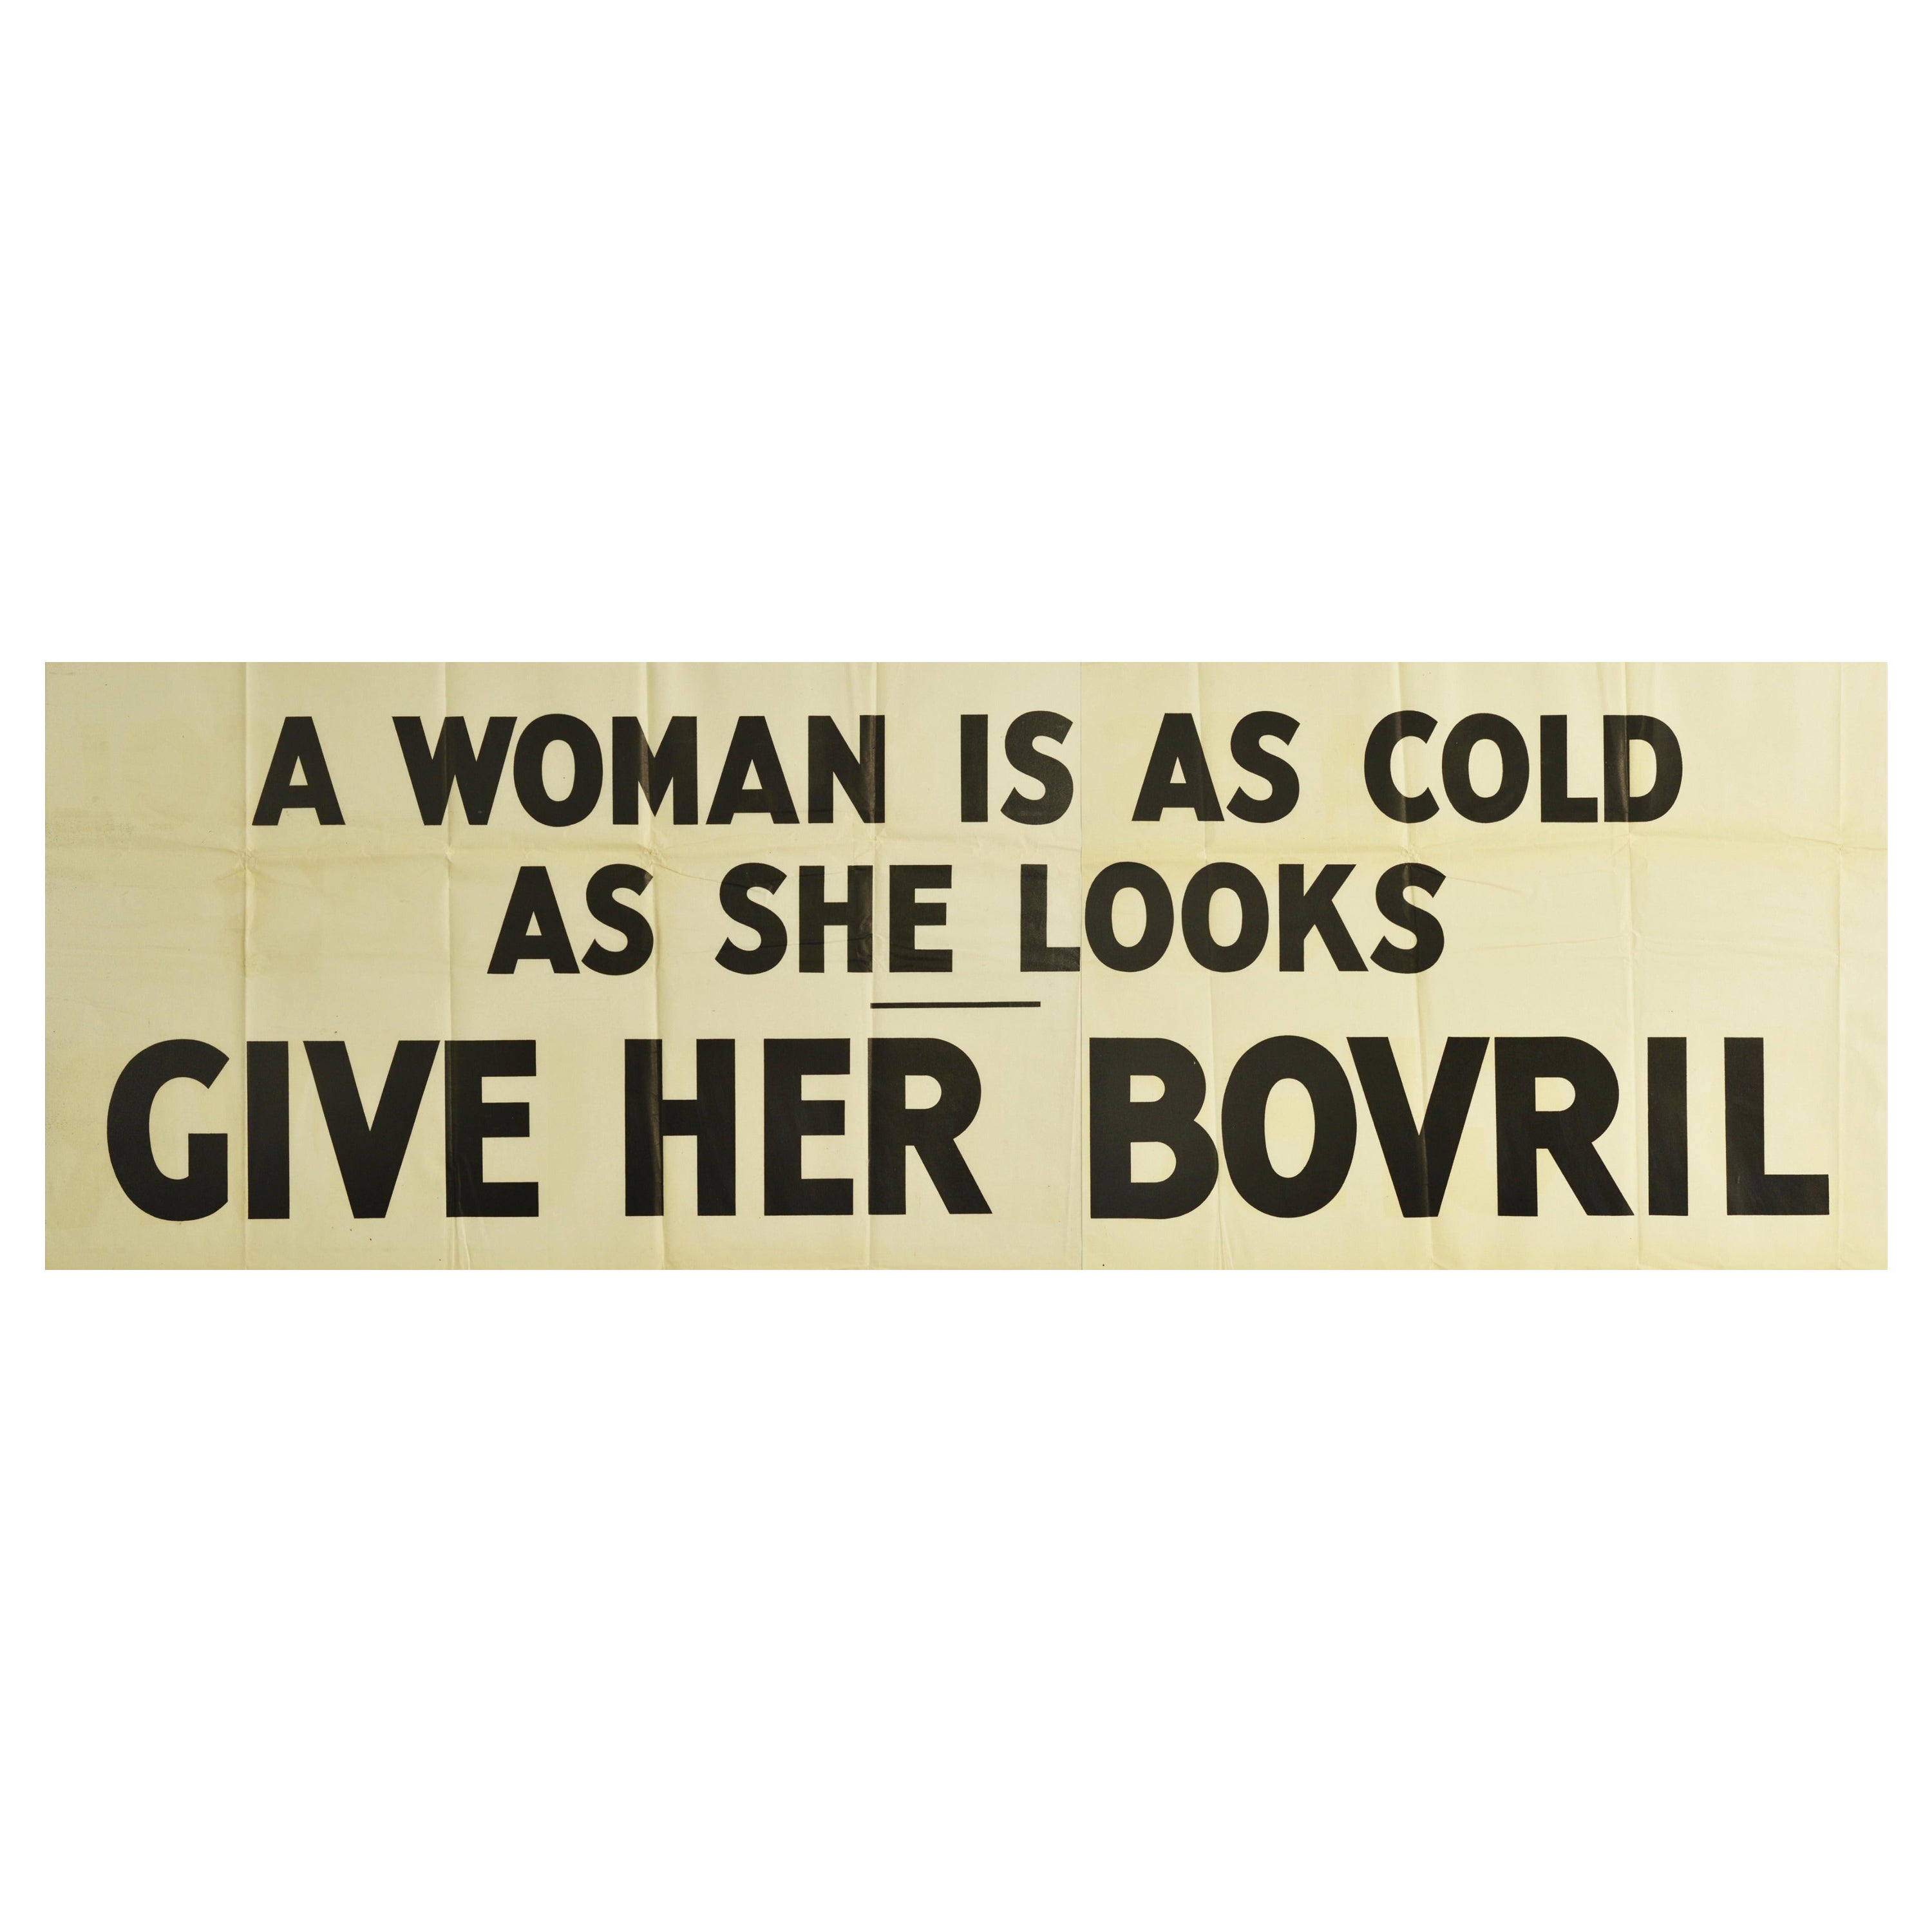 Original Vintage Poster A Woman Is As Cold As She Looks Give Her Bovril Hot Food